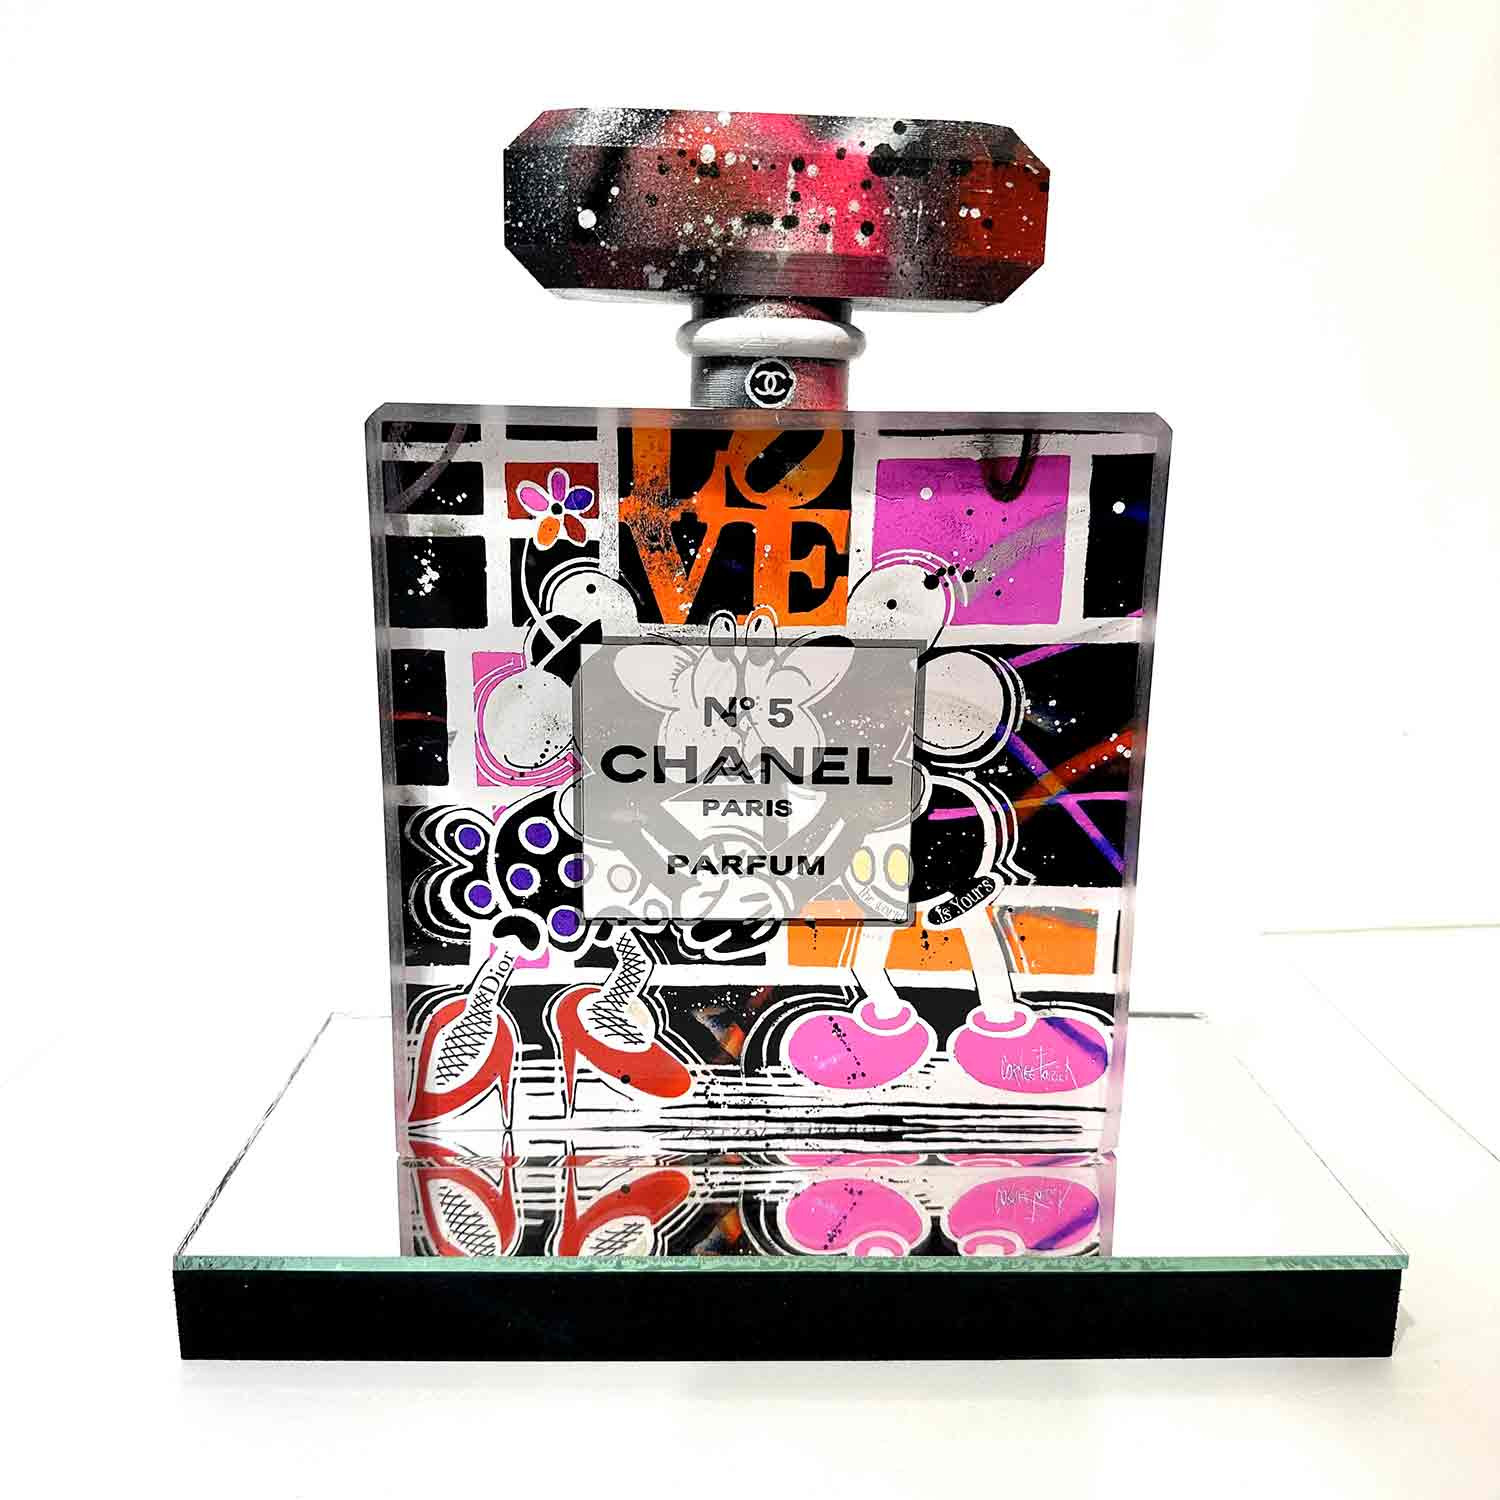 Patrick Cornée, Chanel N°5, sculpture - Artalistic online contemporary art buying and selling gallery